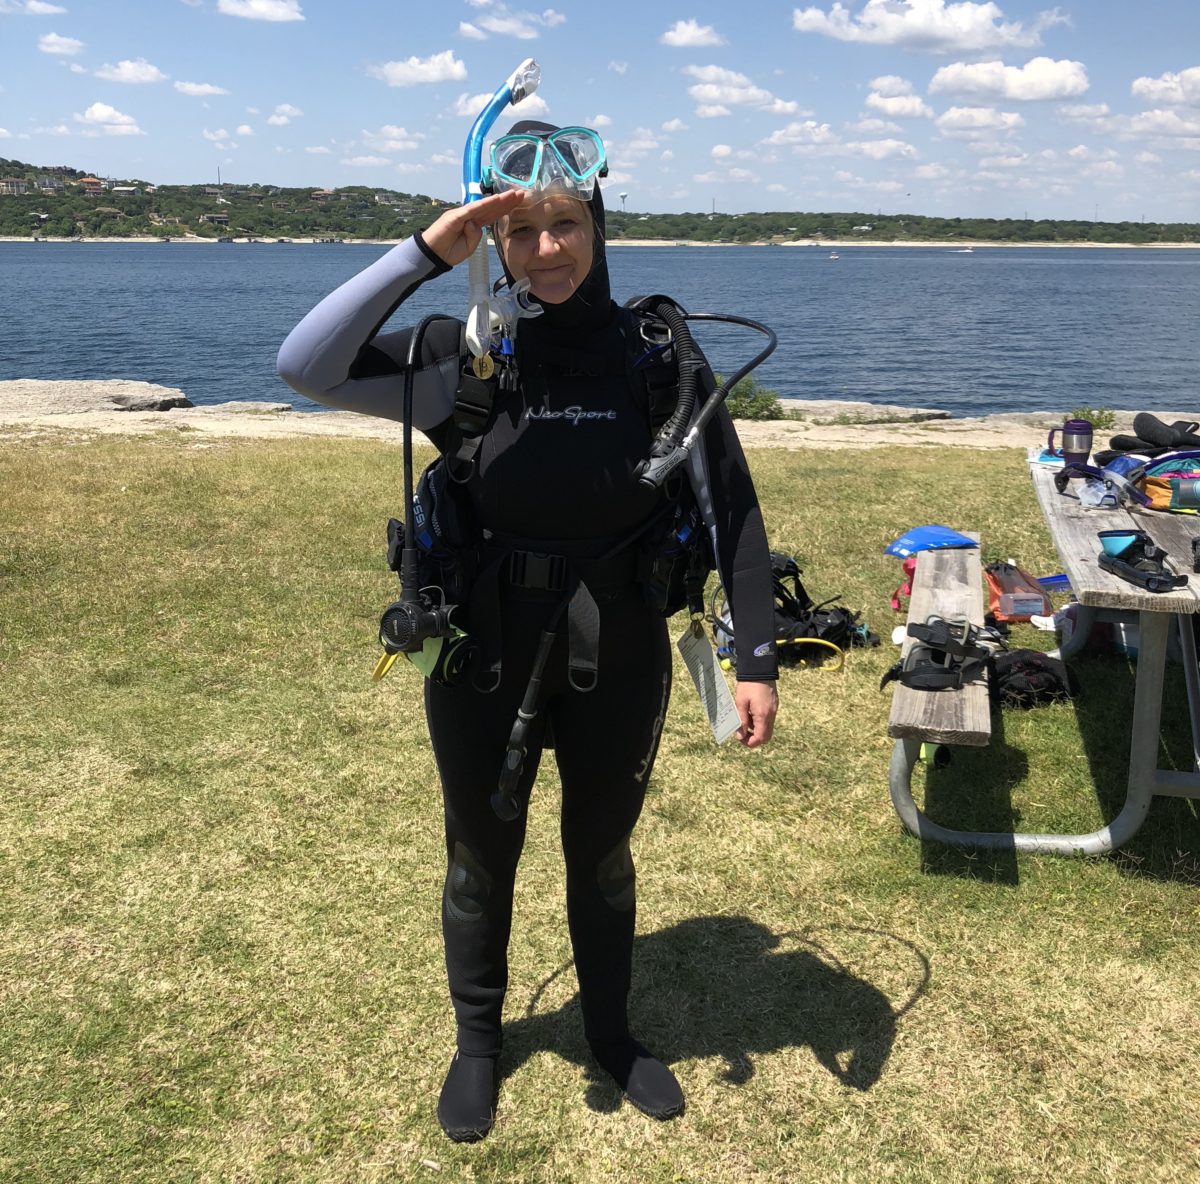 Scuba Certification At Dive World Austin: From A Mermaids Perspective